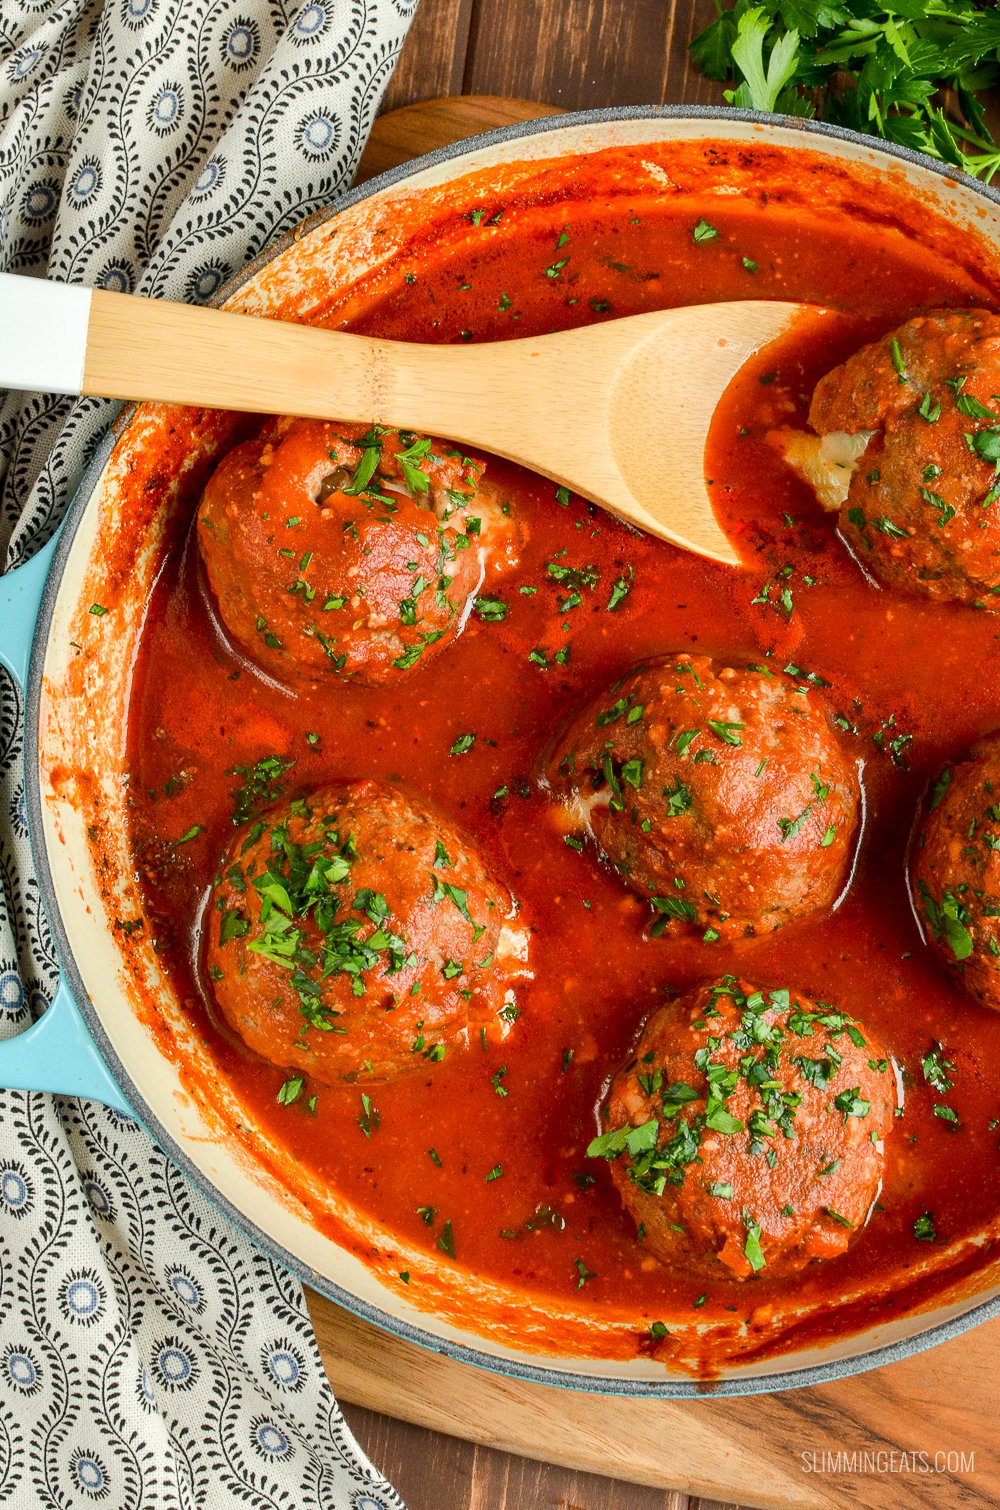 mega stuffed meatballs in tomato sauce in cast iron pan with wooden spoon